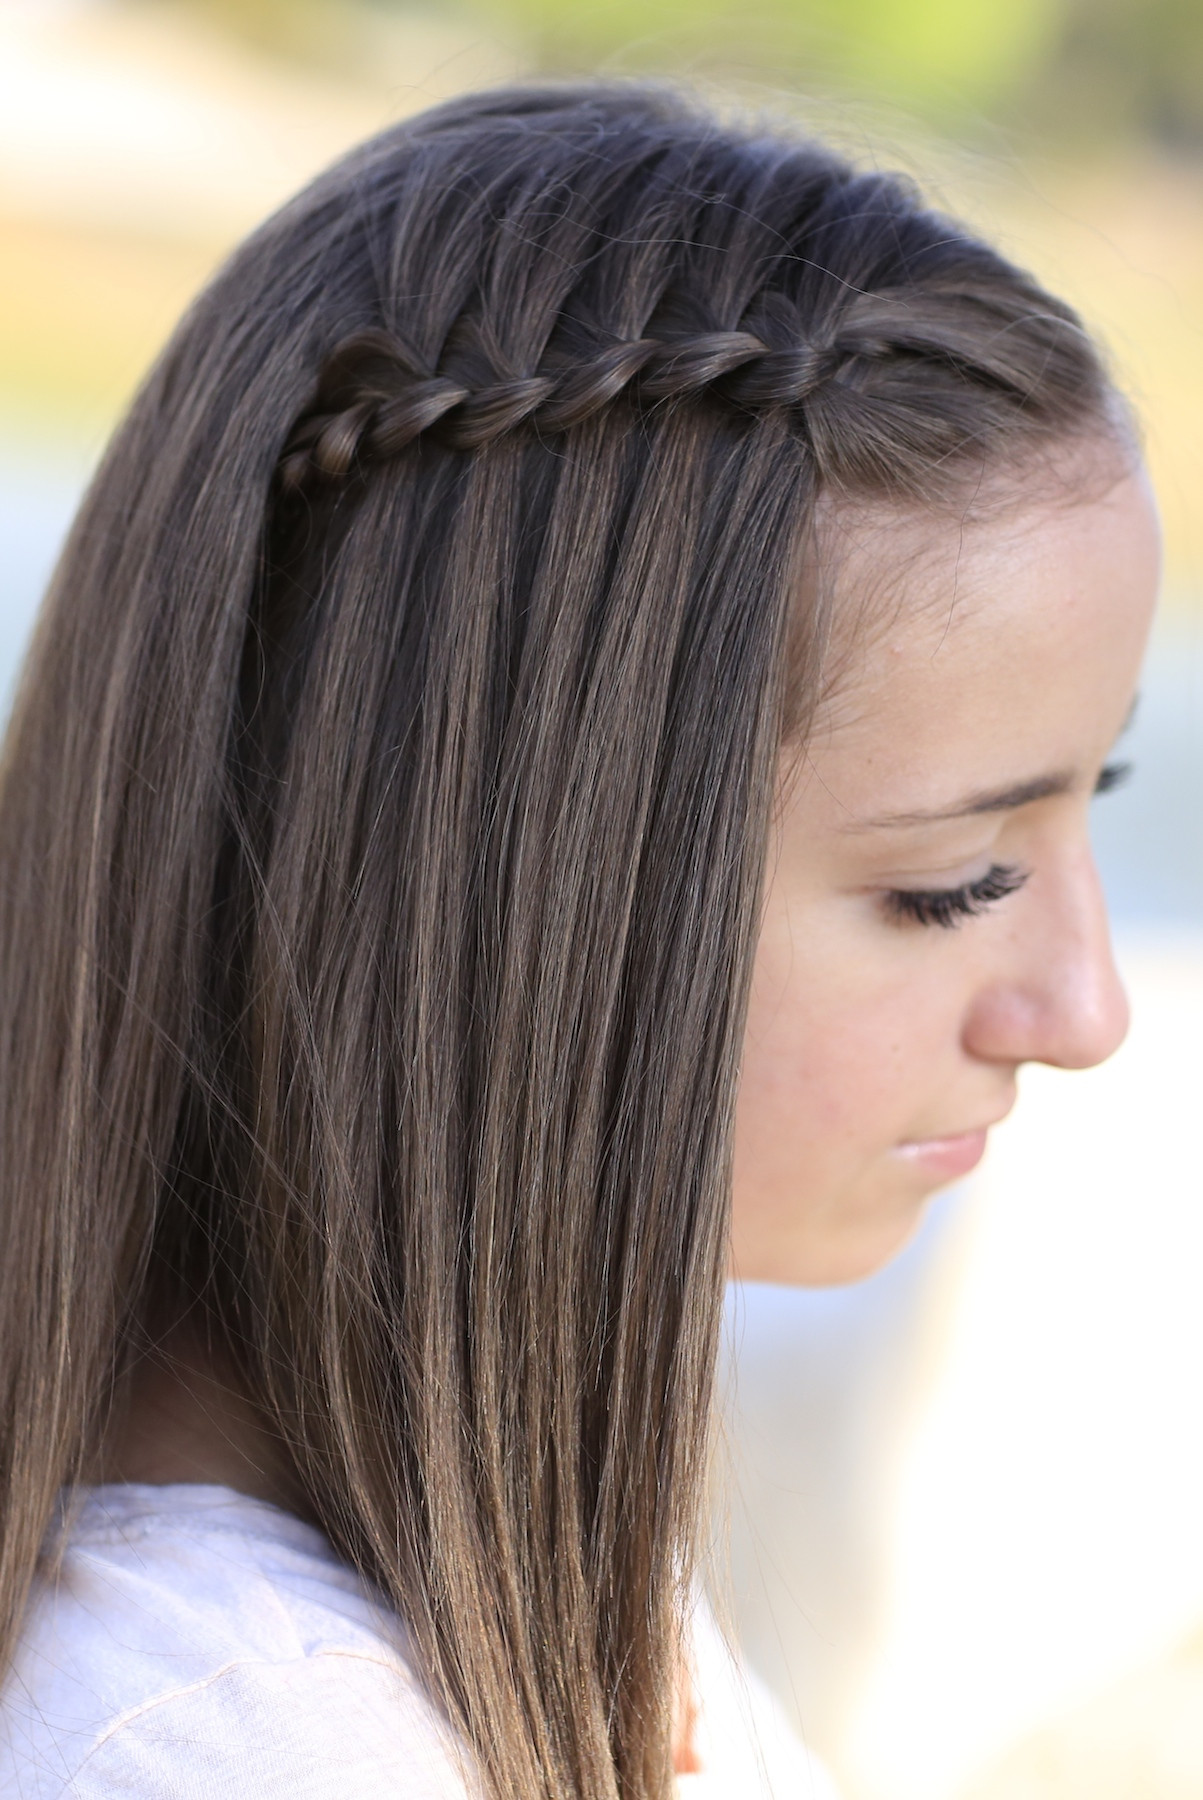 Hairstyles For 13 Year Olds Girl
 10 things to consider before choosing cute hairstyles for